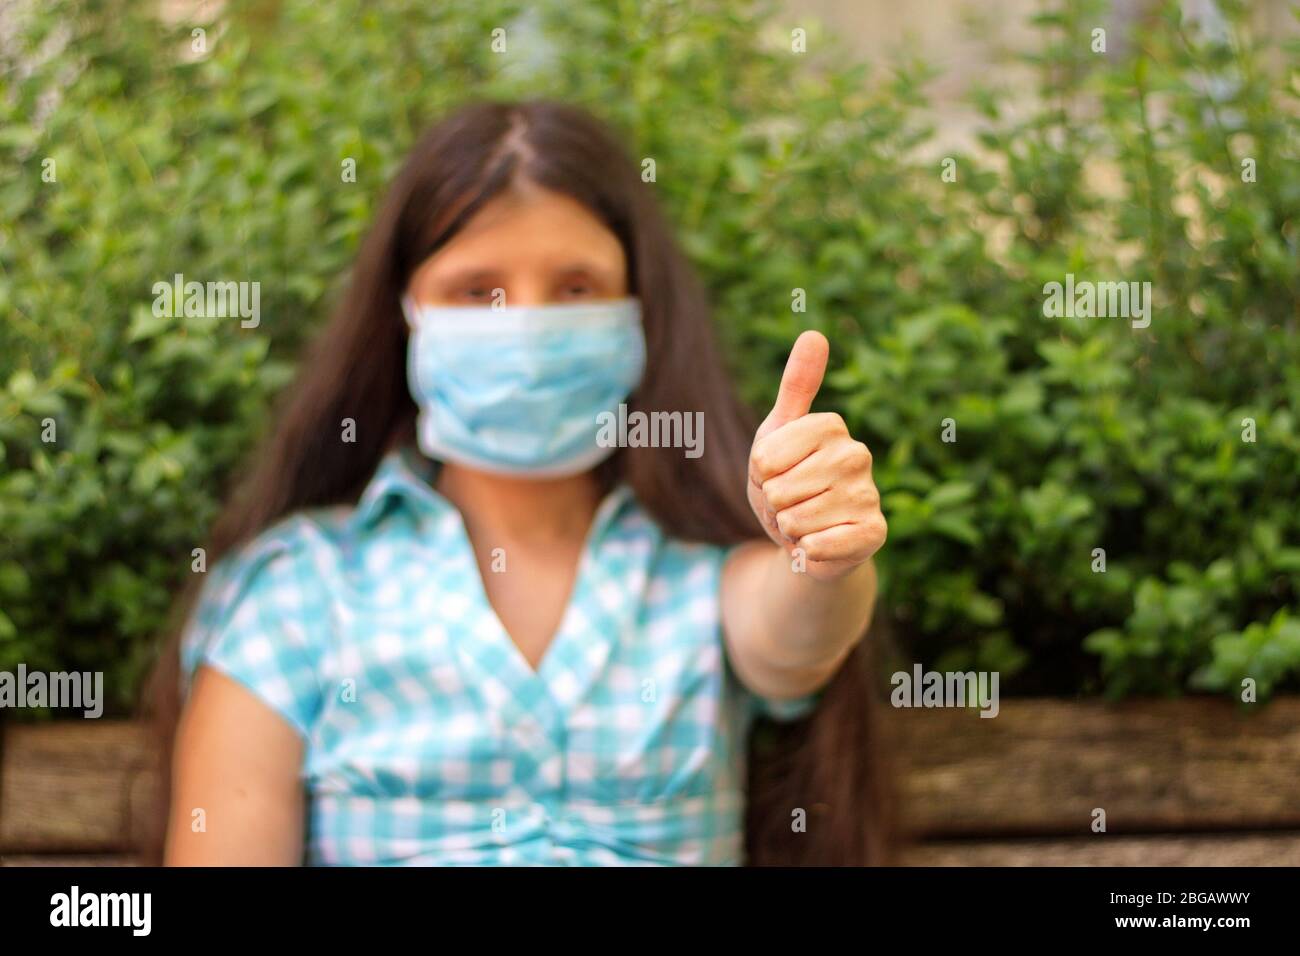 Portrait of young woman gesturing with hand wearing medicine mask Stock Photo